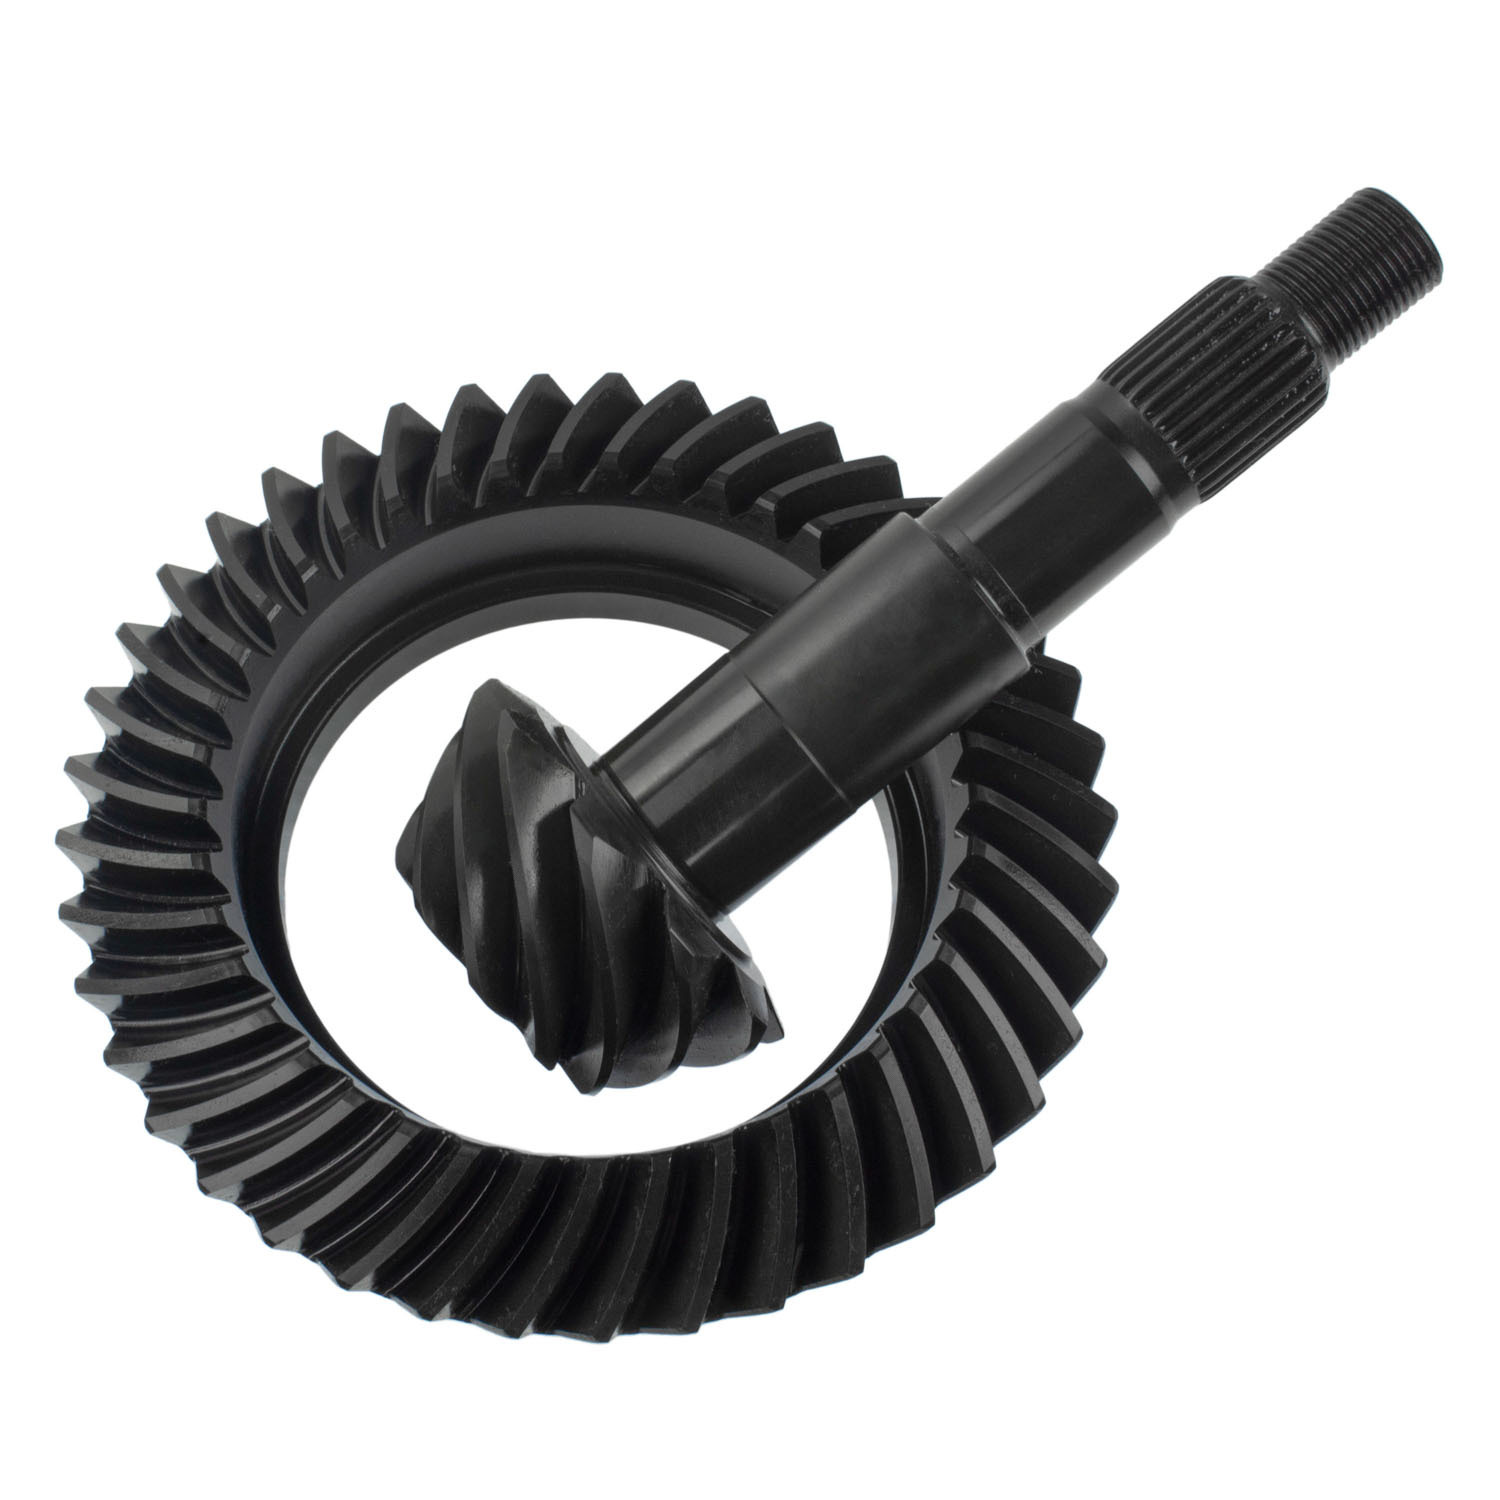 Richmond Gear GM75410TK - Ring and Pinion, Excel, 4.10 Ratio, 27 Spline Pinion, 2 Series, 7.5 in / 7.625 in / 7.6 in IFS, GM 10-Bolt, Kit